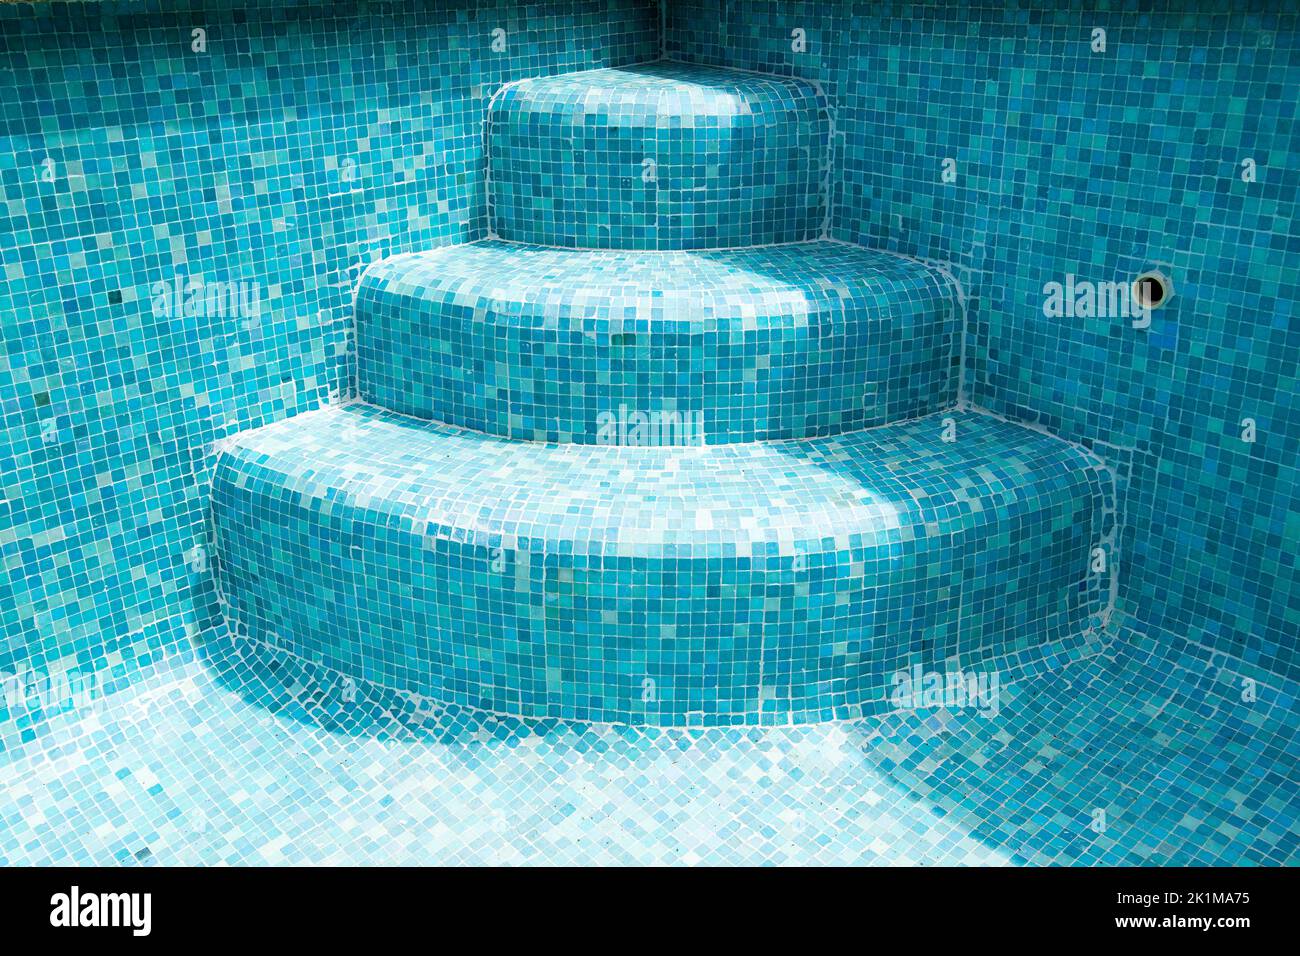 Pool steps in an empty mosaic swimming pool Stock Photo